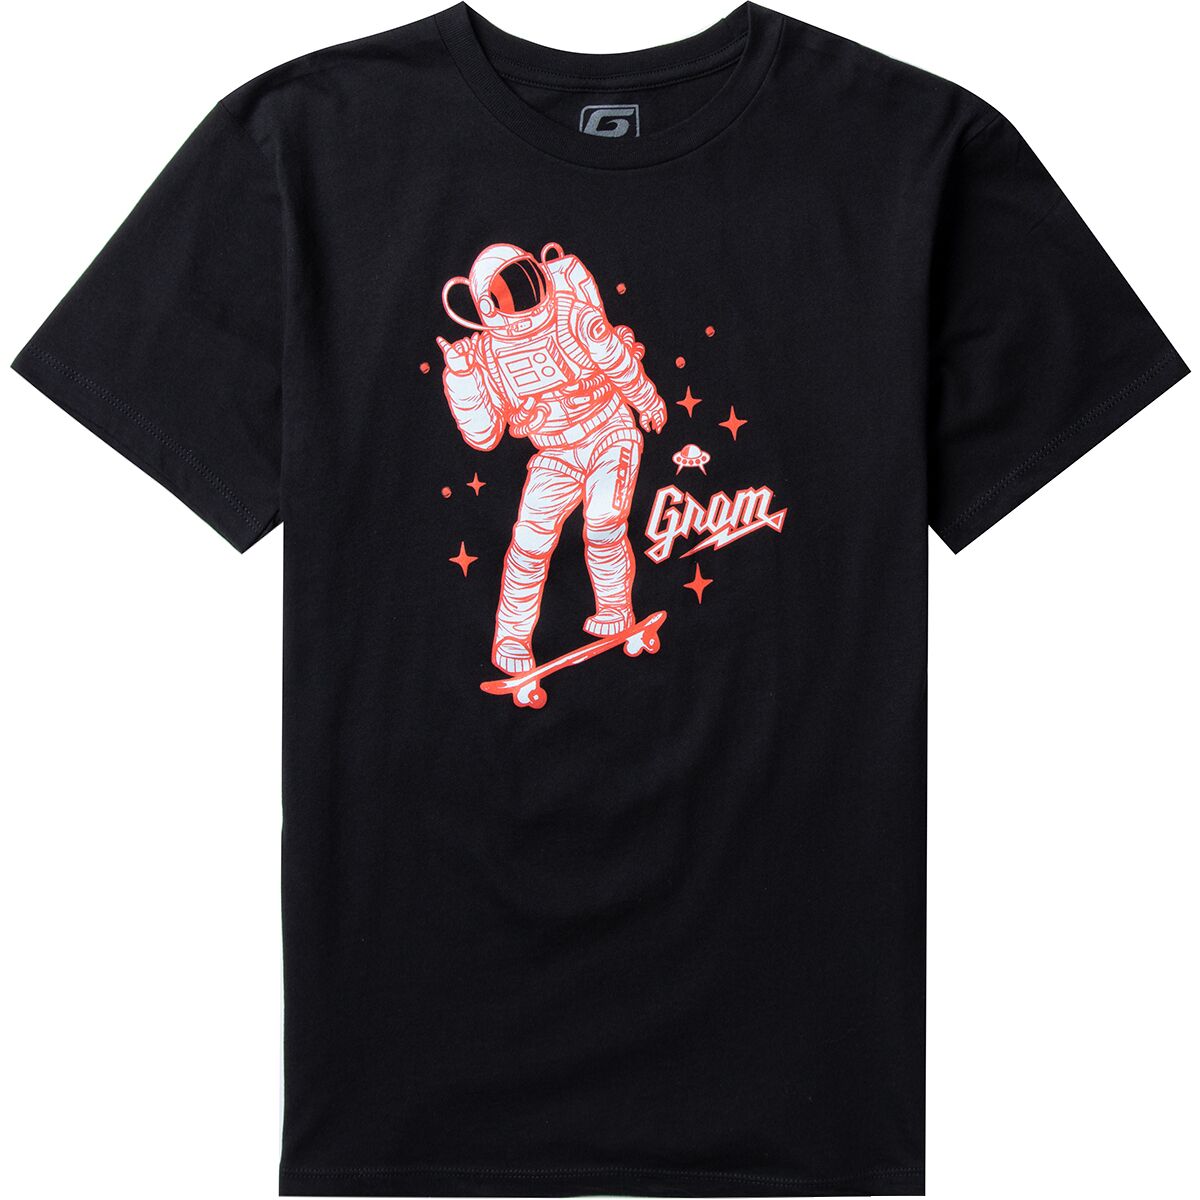 Grom Space Ollie Short-Sleeve Graphic T-Shirt - Boys'